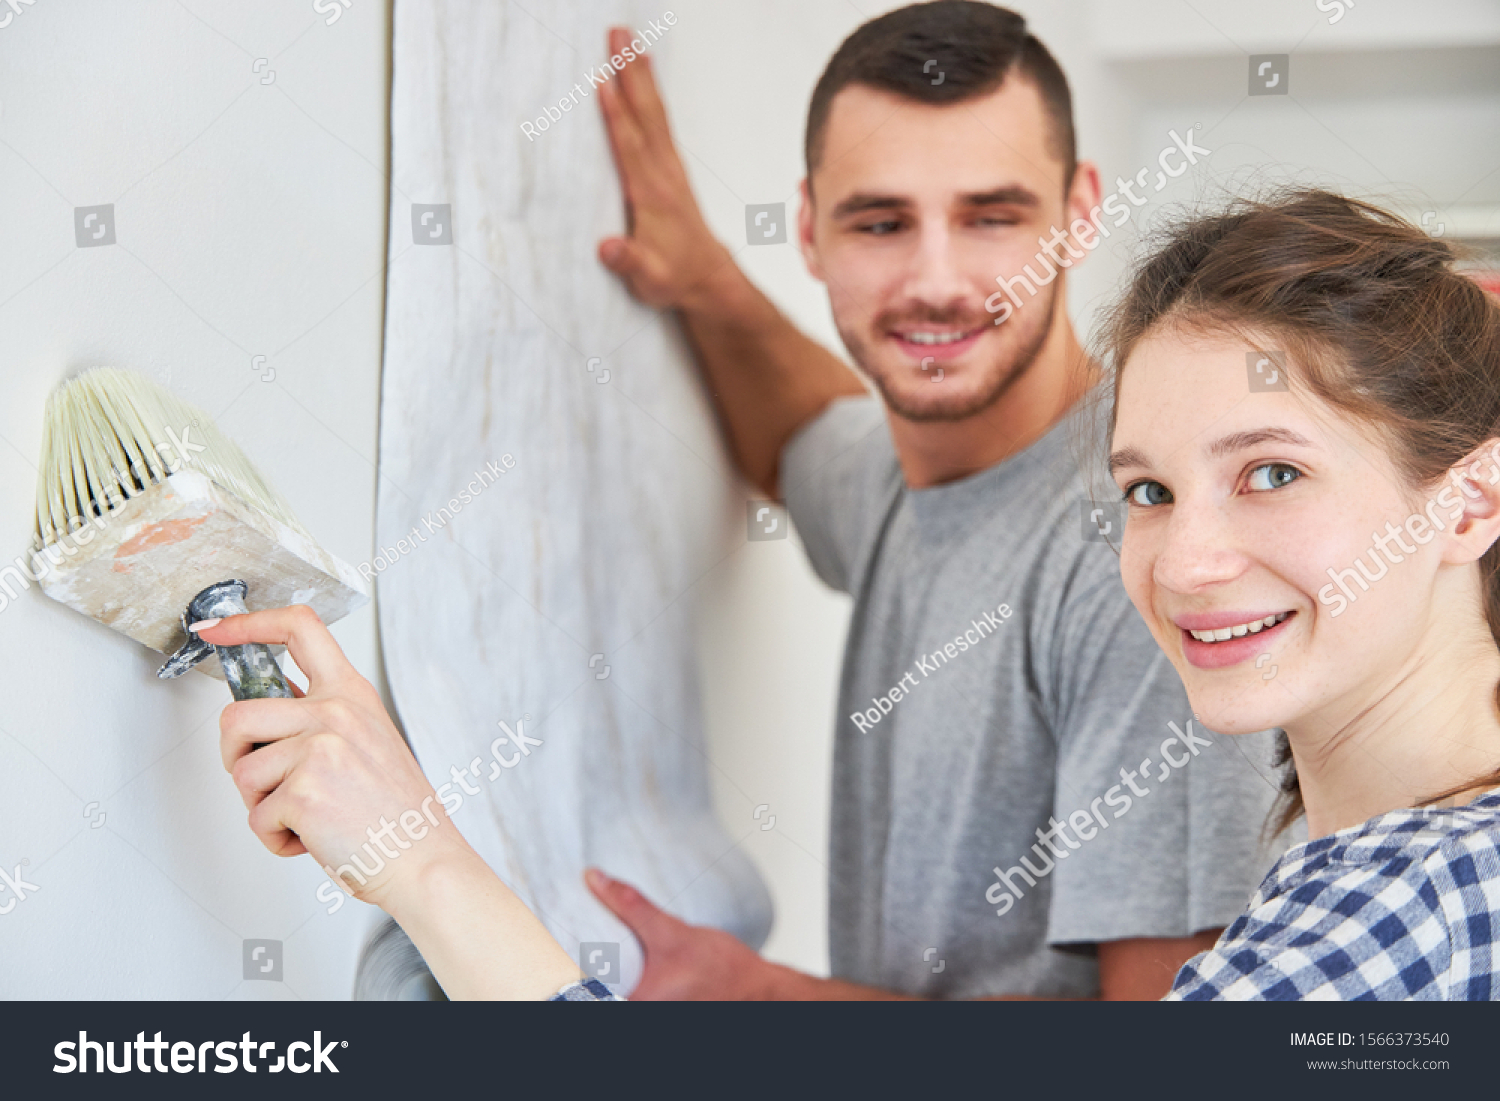 Young woman renovating with paste brush while wallpapering with wallpaper on a wall #1566373540